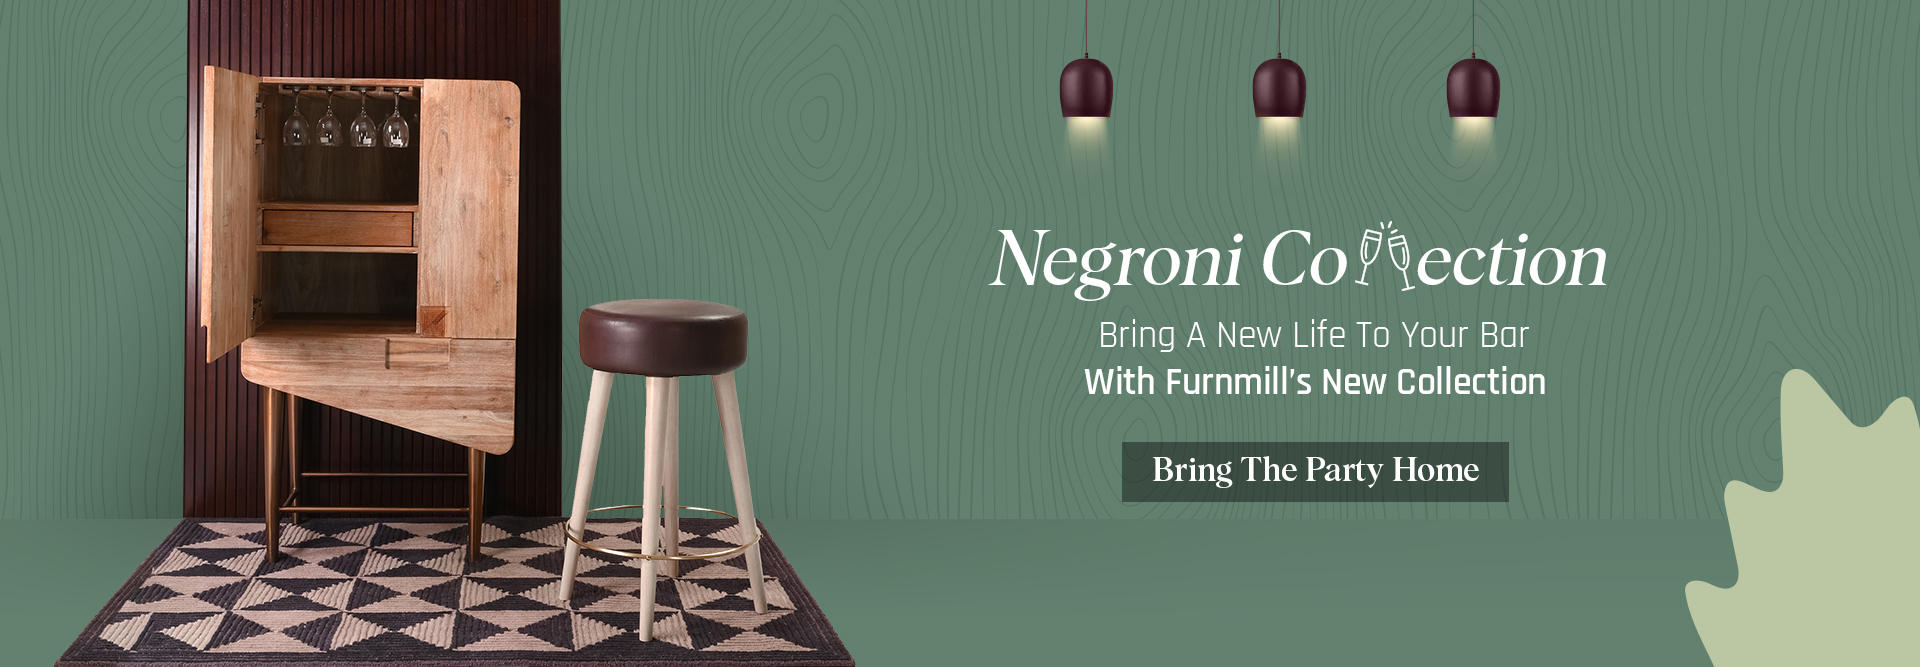 negroni home furniture collection